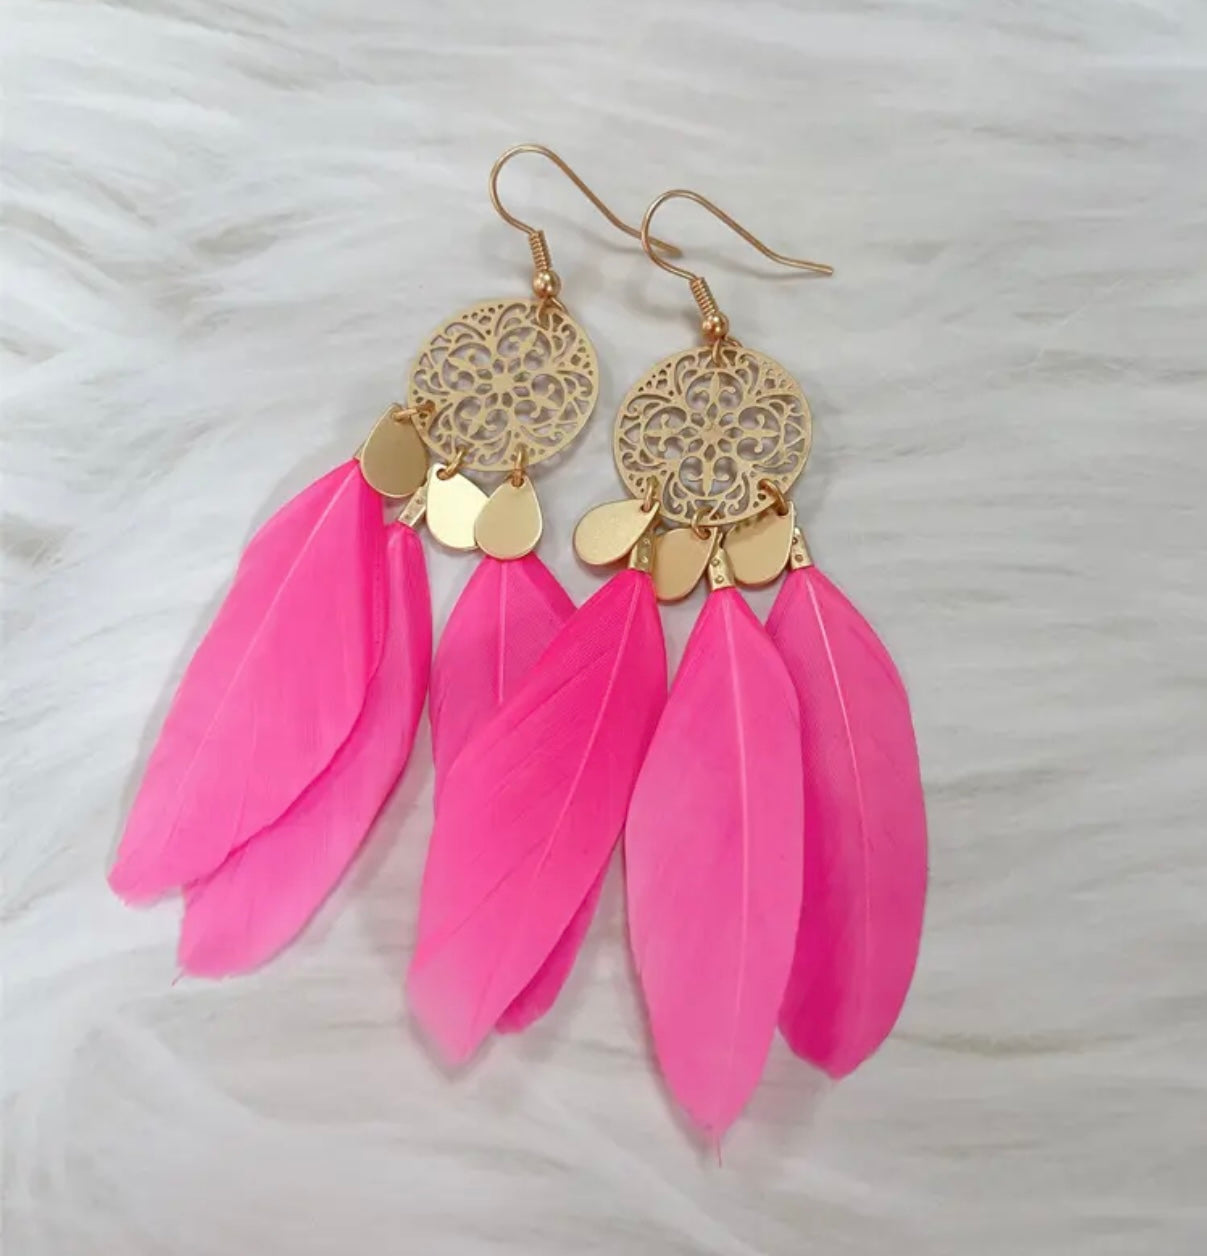 Real Feather Earrings in Hot Pink, Plush Pink o... - Folksy